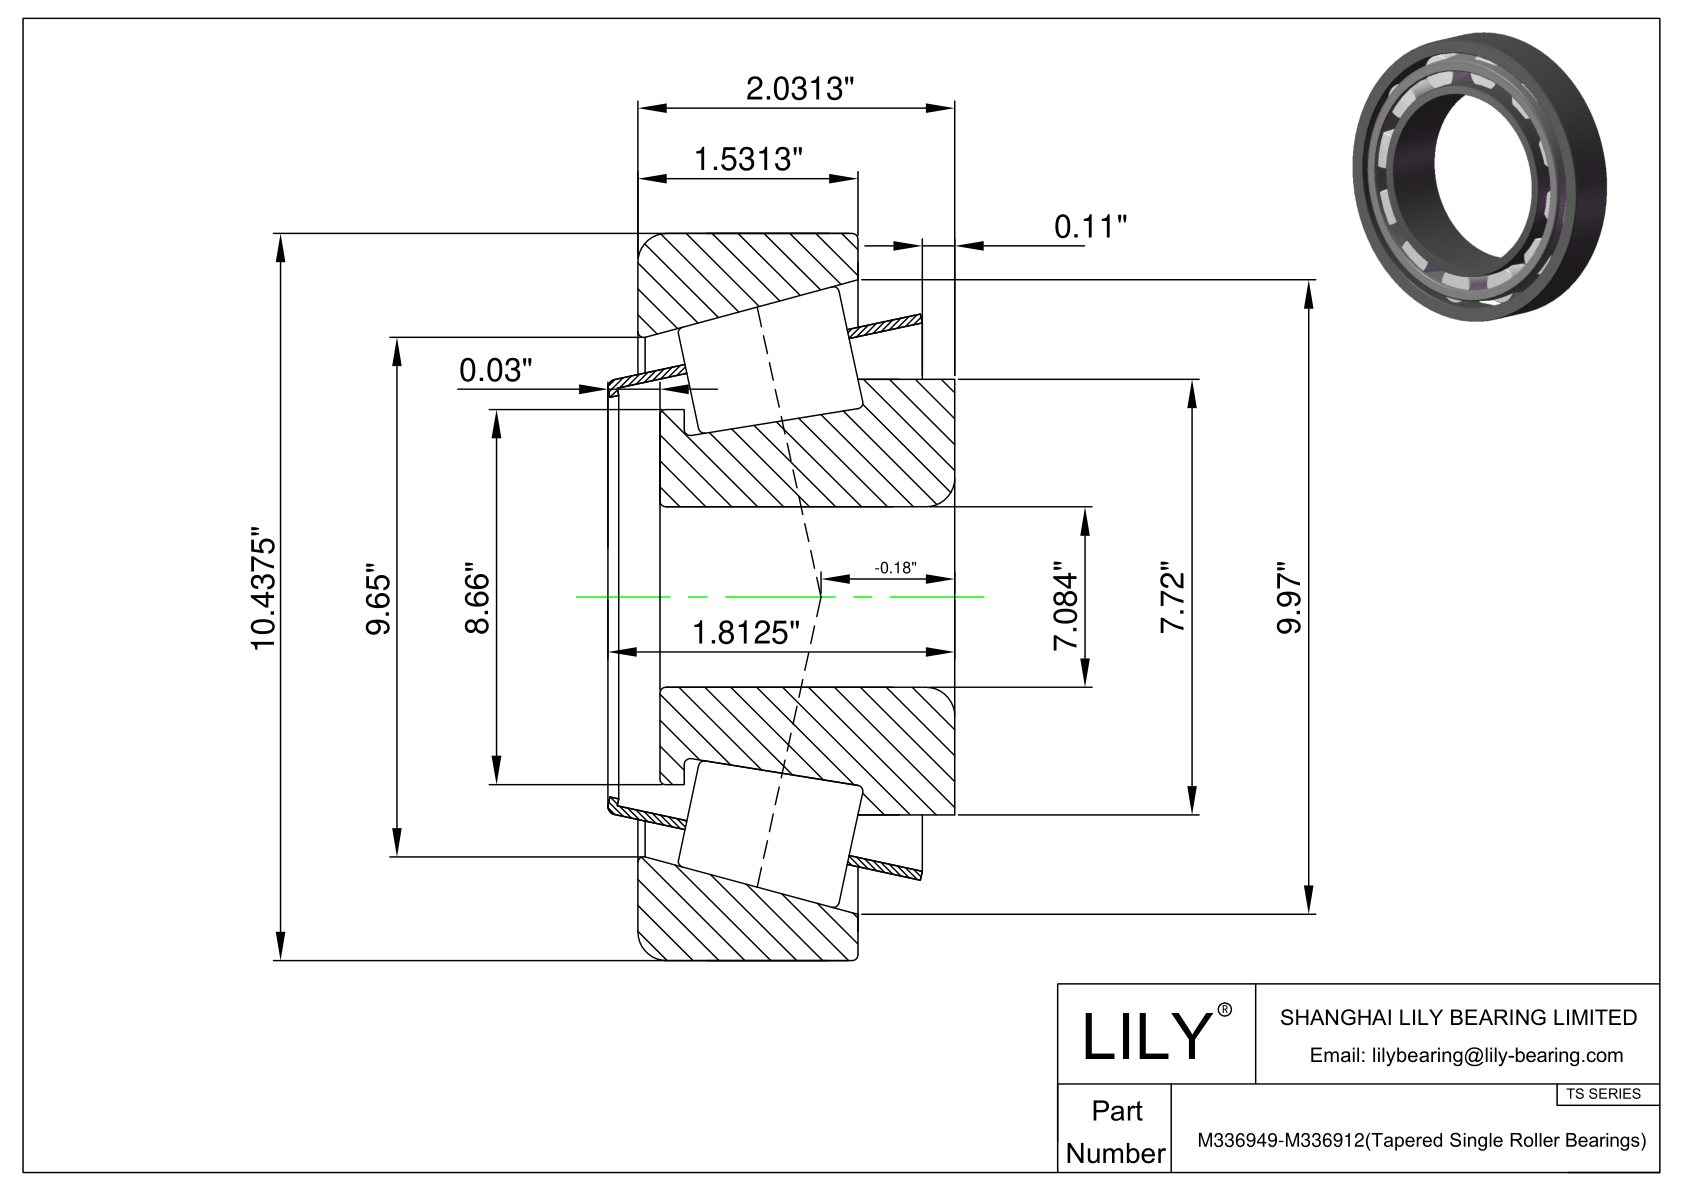 M336949-M336912 TS (Tapered Single Roller Bearings) (Imperial) cad drawing